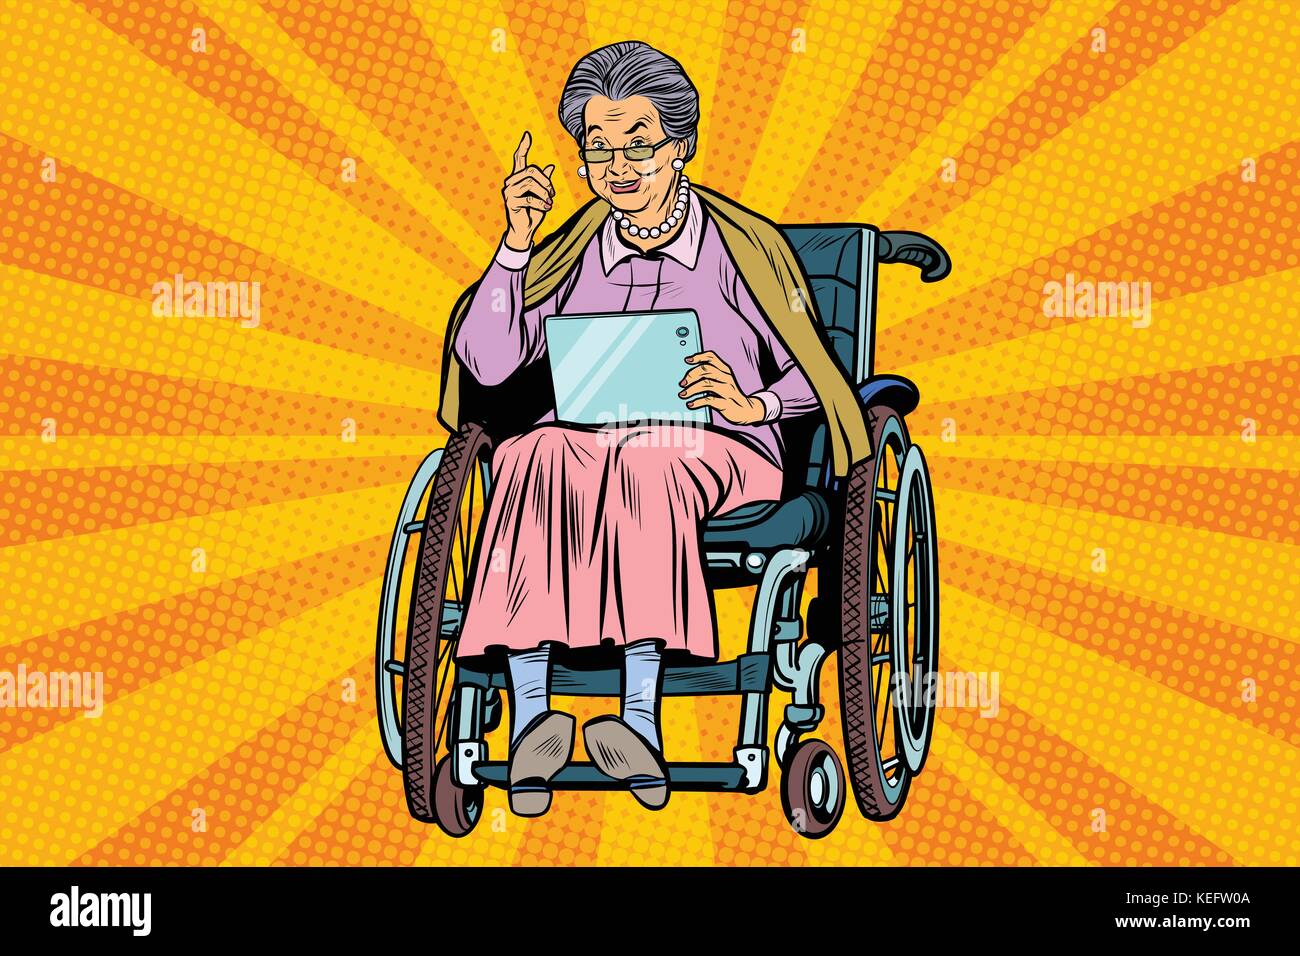 https://c8.alamy.com/comp/KEFW0A/elderly-woman-disabled-person-in-a-wheelchair-gadget-tablet-KEFW0A.jpg